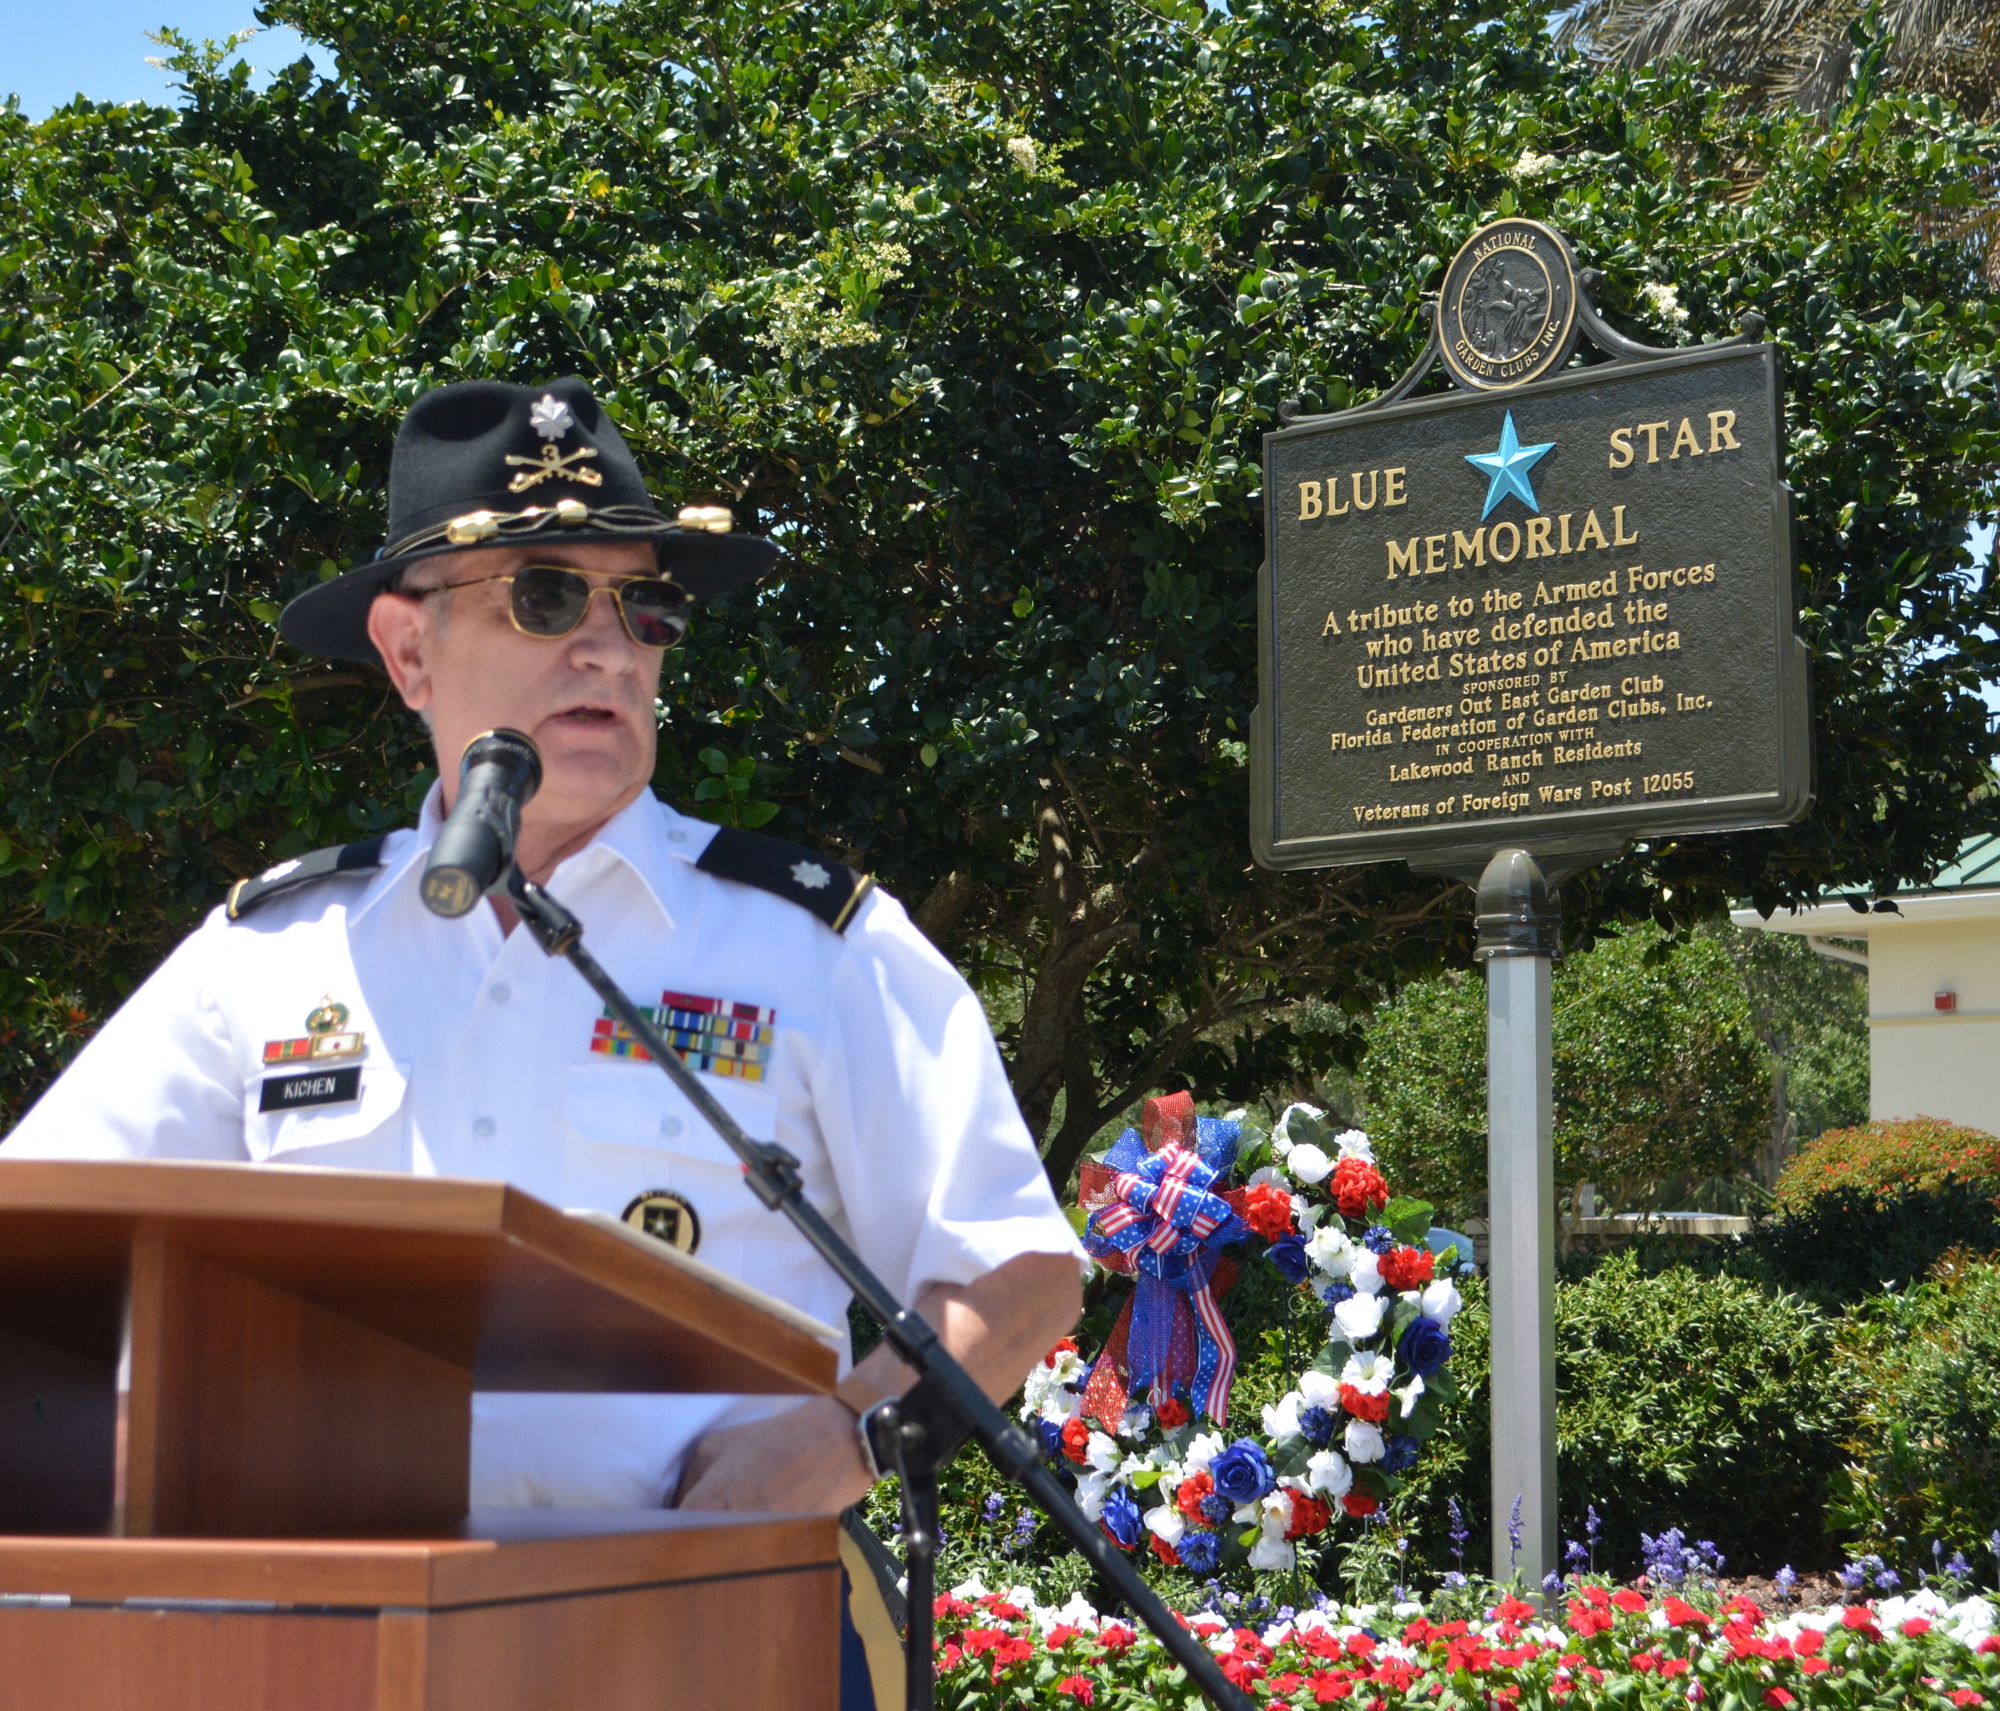 Lt. Col. Lee Kichen is the guest speaker at a ceremony to dedicate a Blue Star Memorial Marker at Lakewood Ranch Town Hall.